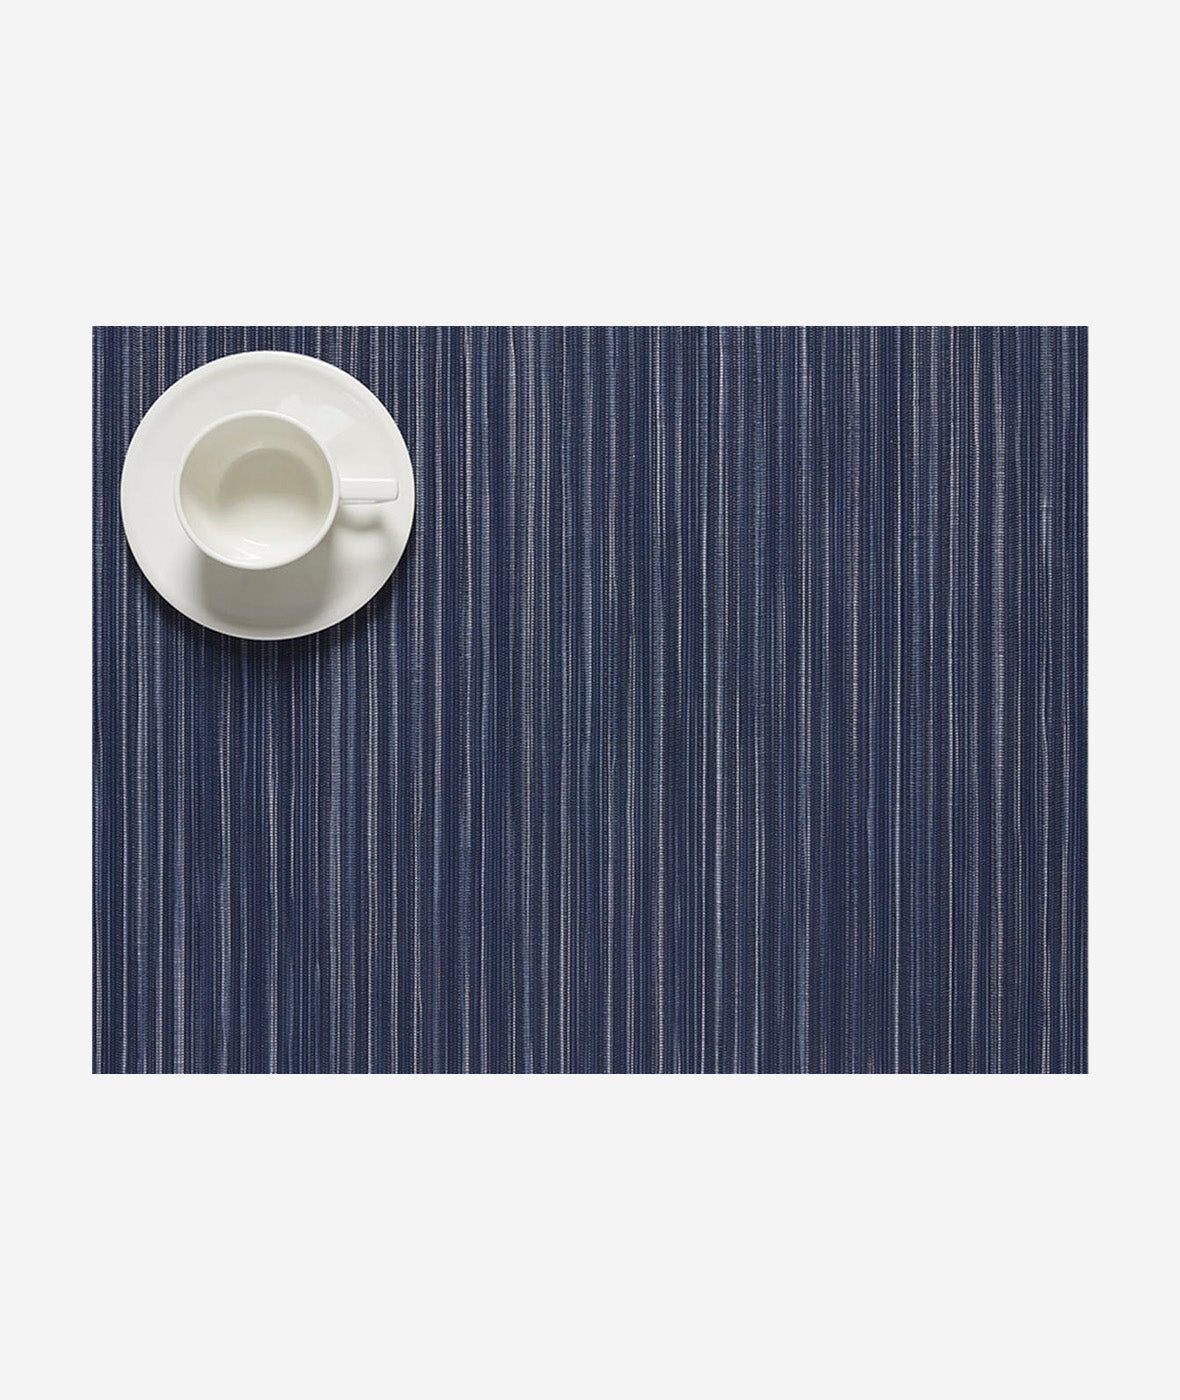 Rib Weave Placemat Set/4 - More Options